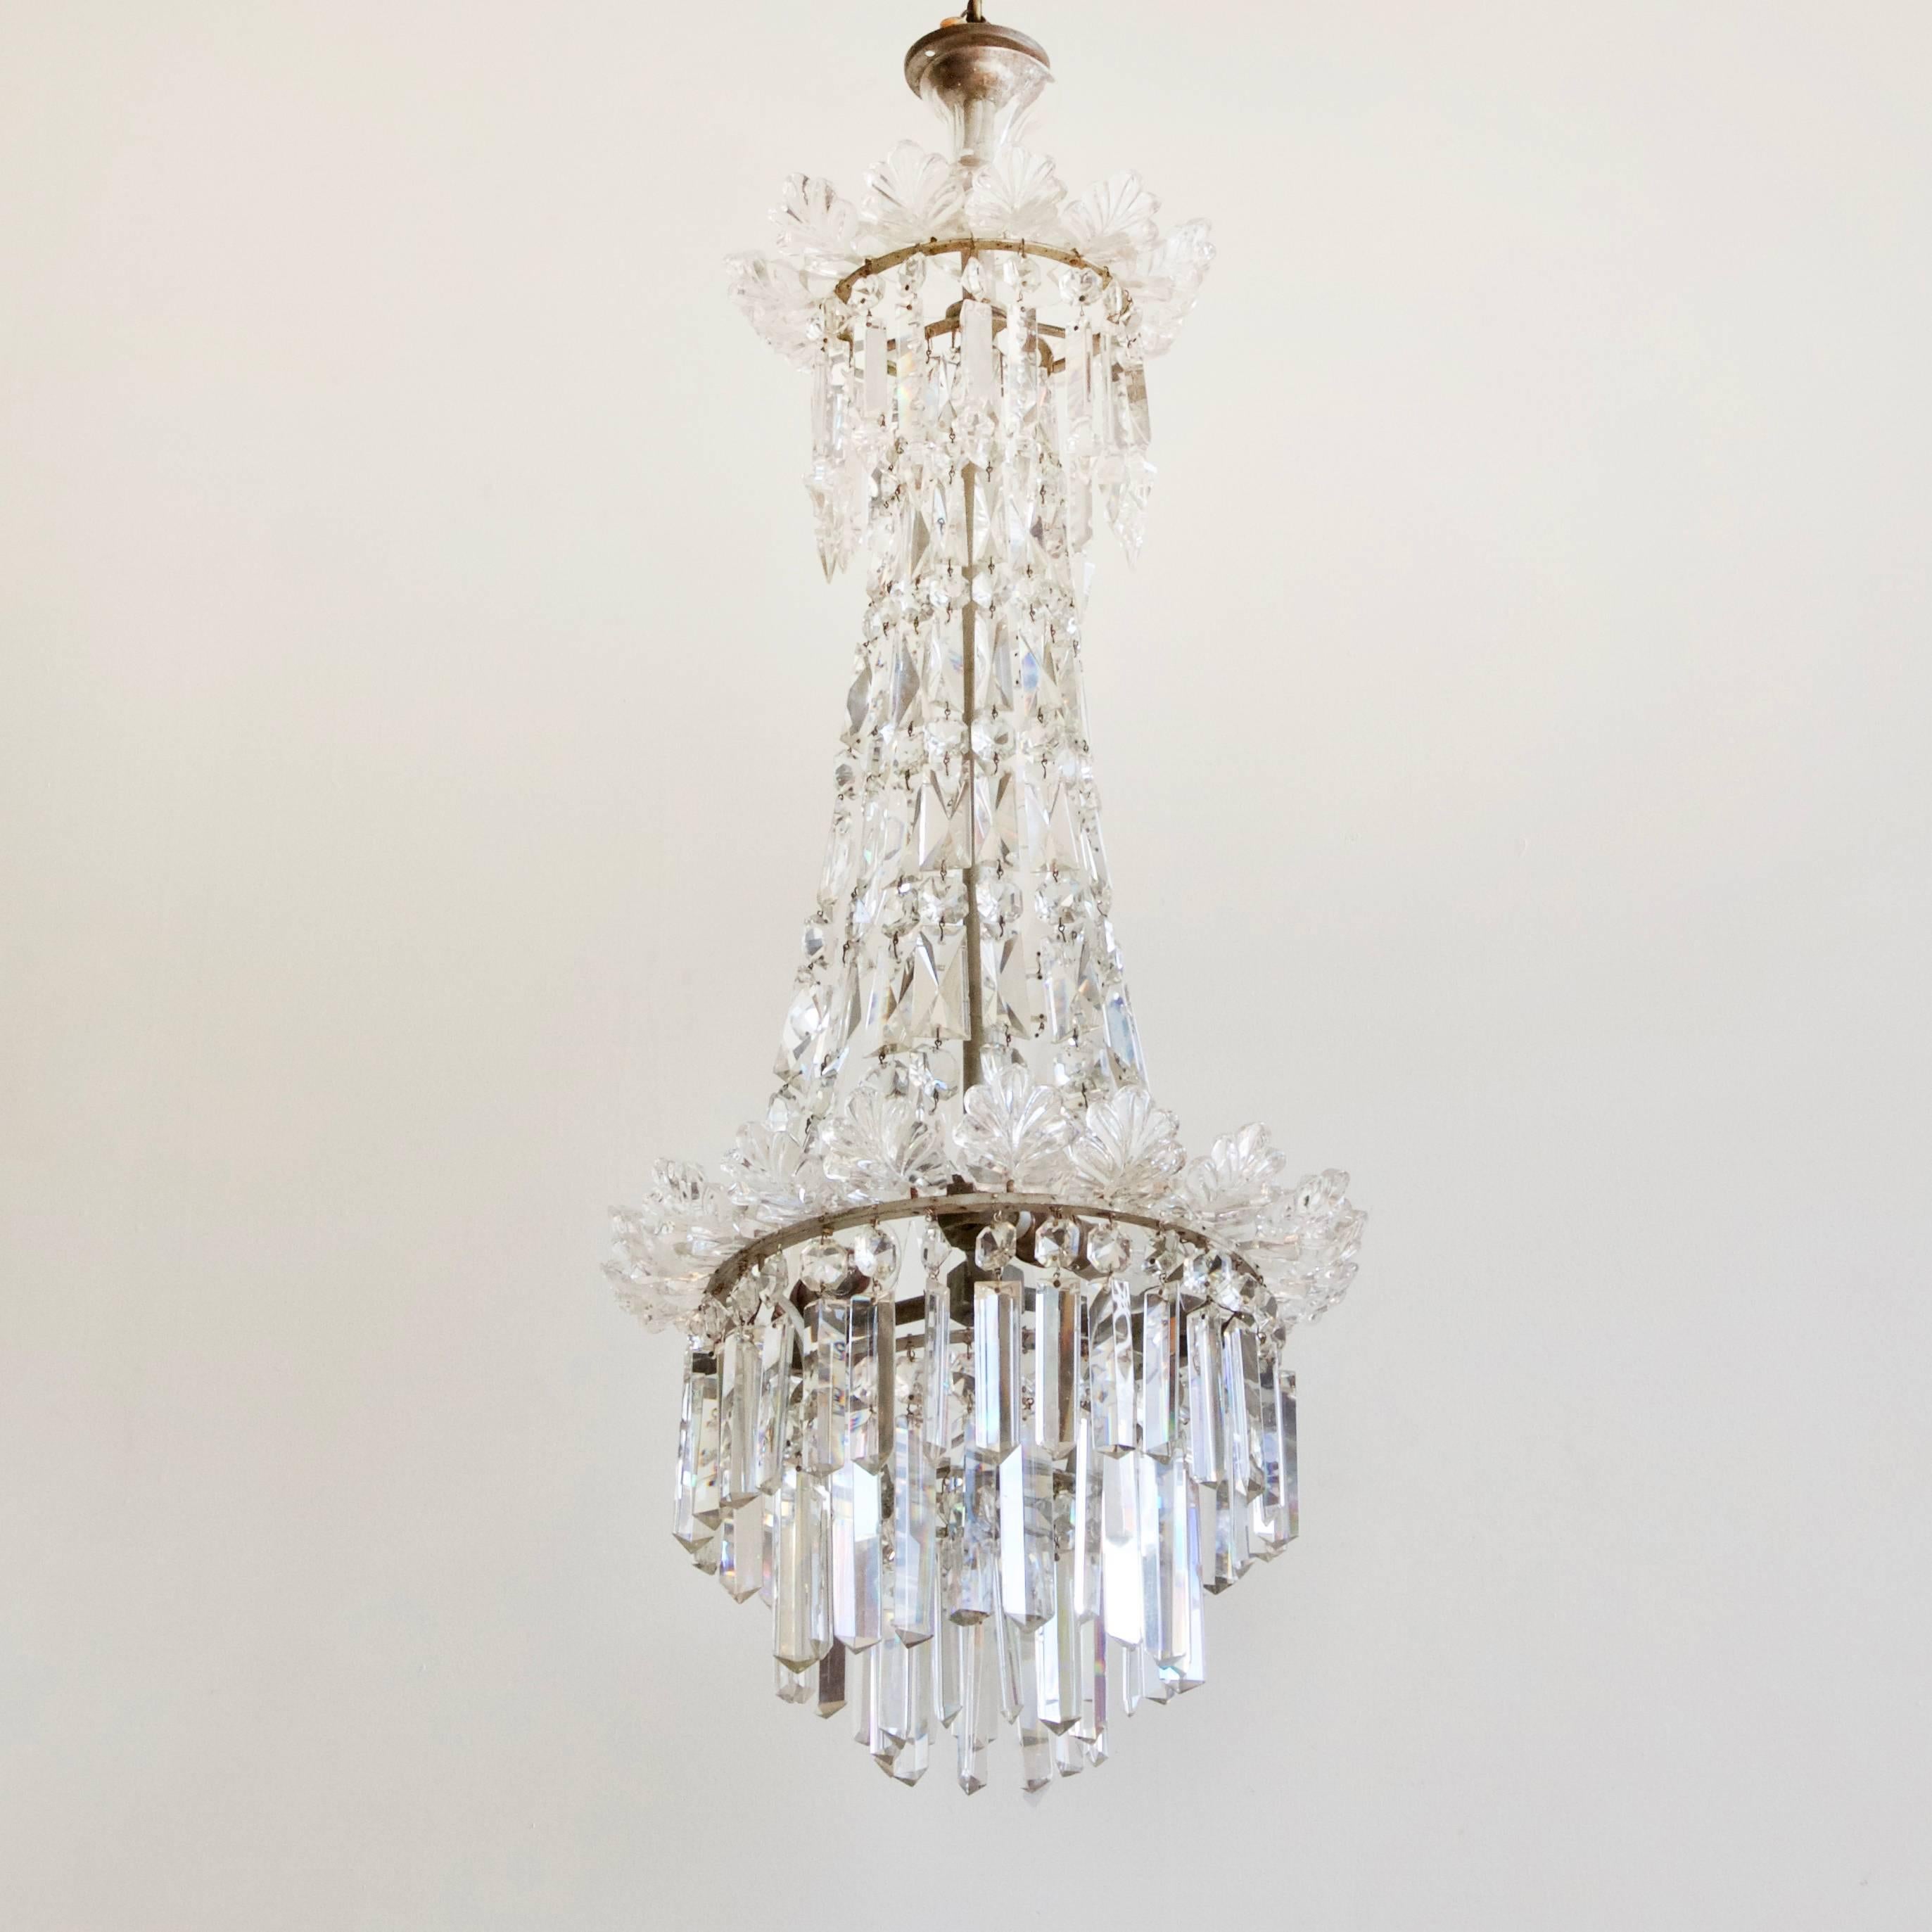 A tall elegant English chandelier dressed in hand-cut crystal. A ring of Prince Albert cut crystal are hung from an upper tier of crystal leaf pieces. Swags of coffin lid and buttons form the central body leading to a waterfall of crystal prism